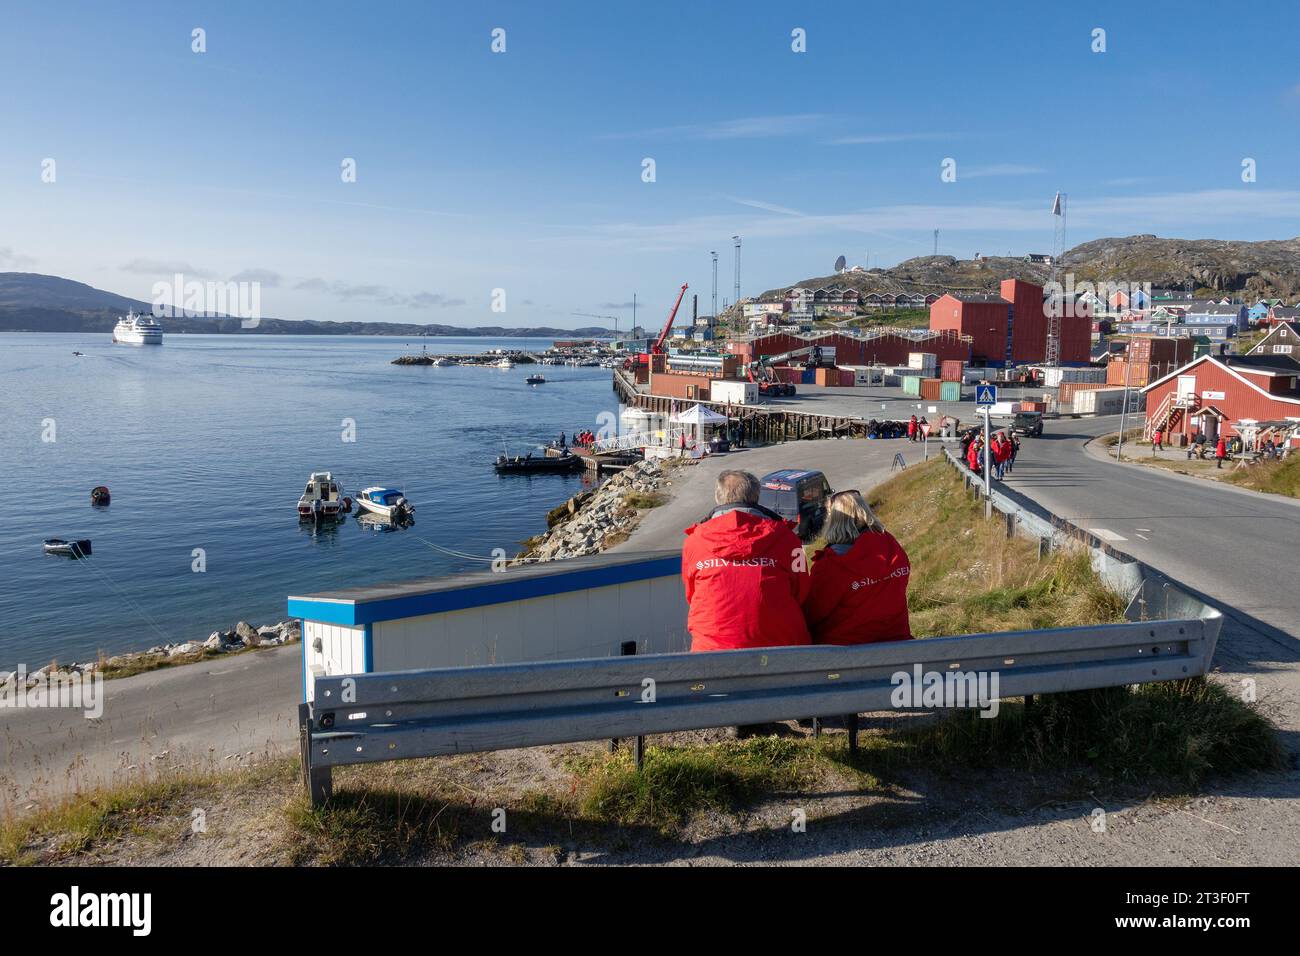 Cruise Ship Passengers Enjoy The Early Morning In The Town Of Qaqortoq Greenland, Looking At The Port Area Stock Photo